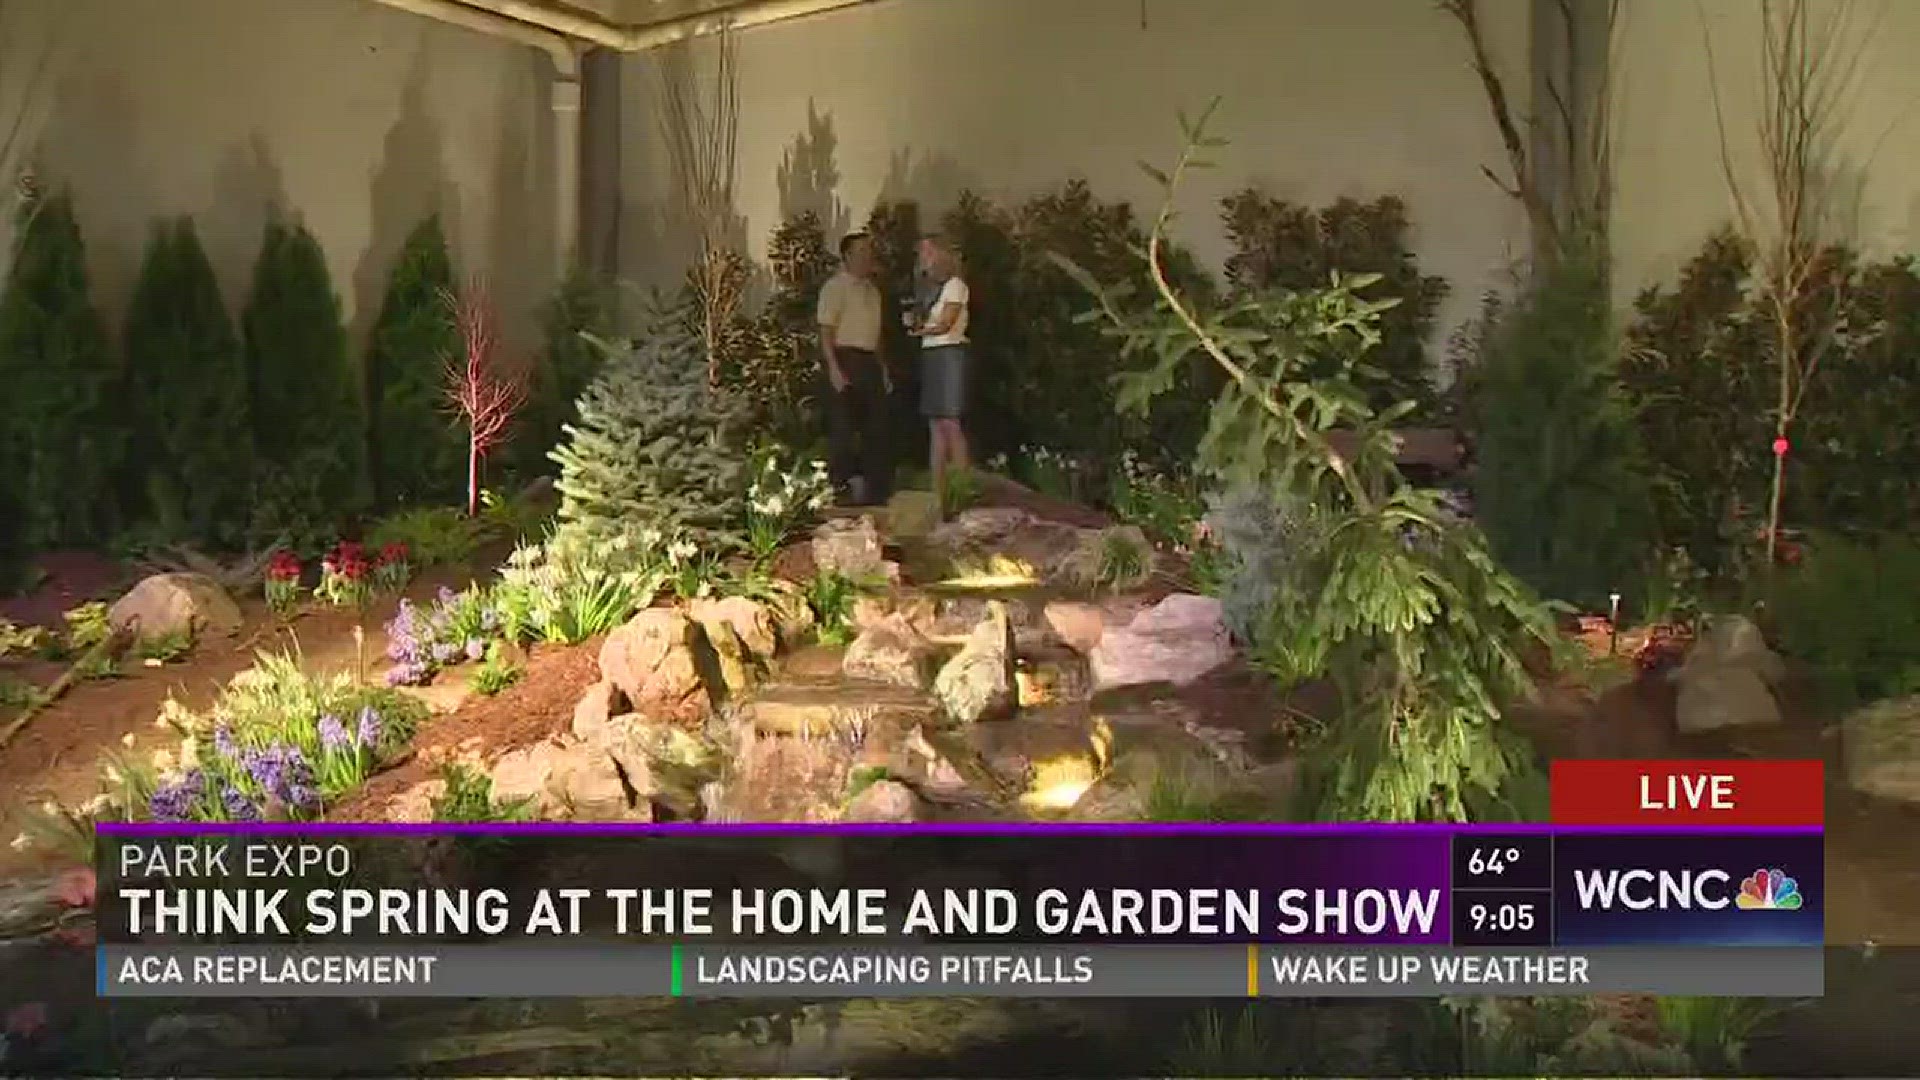 The Southern Spring Home & Garden Show is in full swing at the Park Expo in Charlotte.